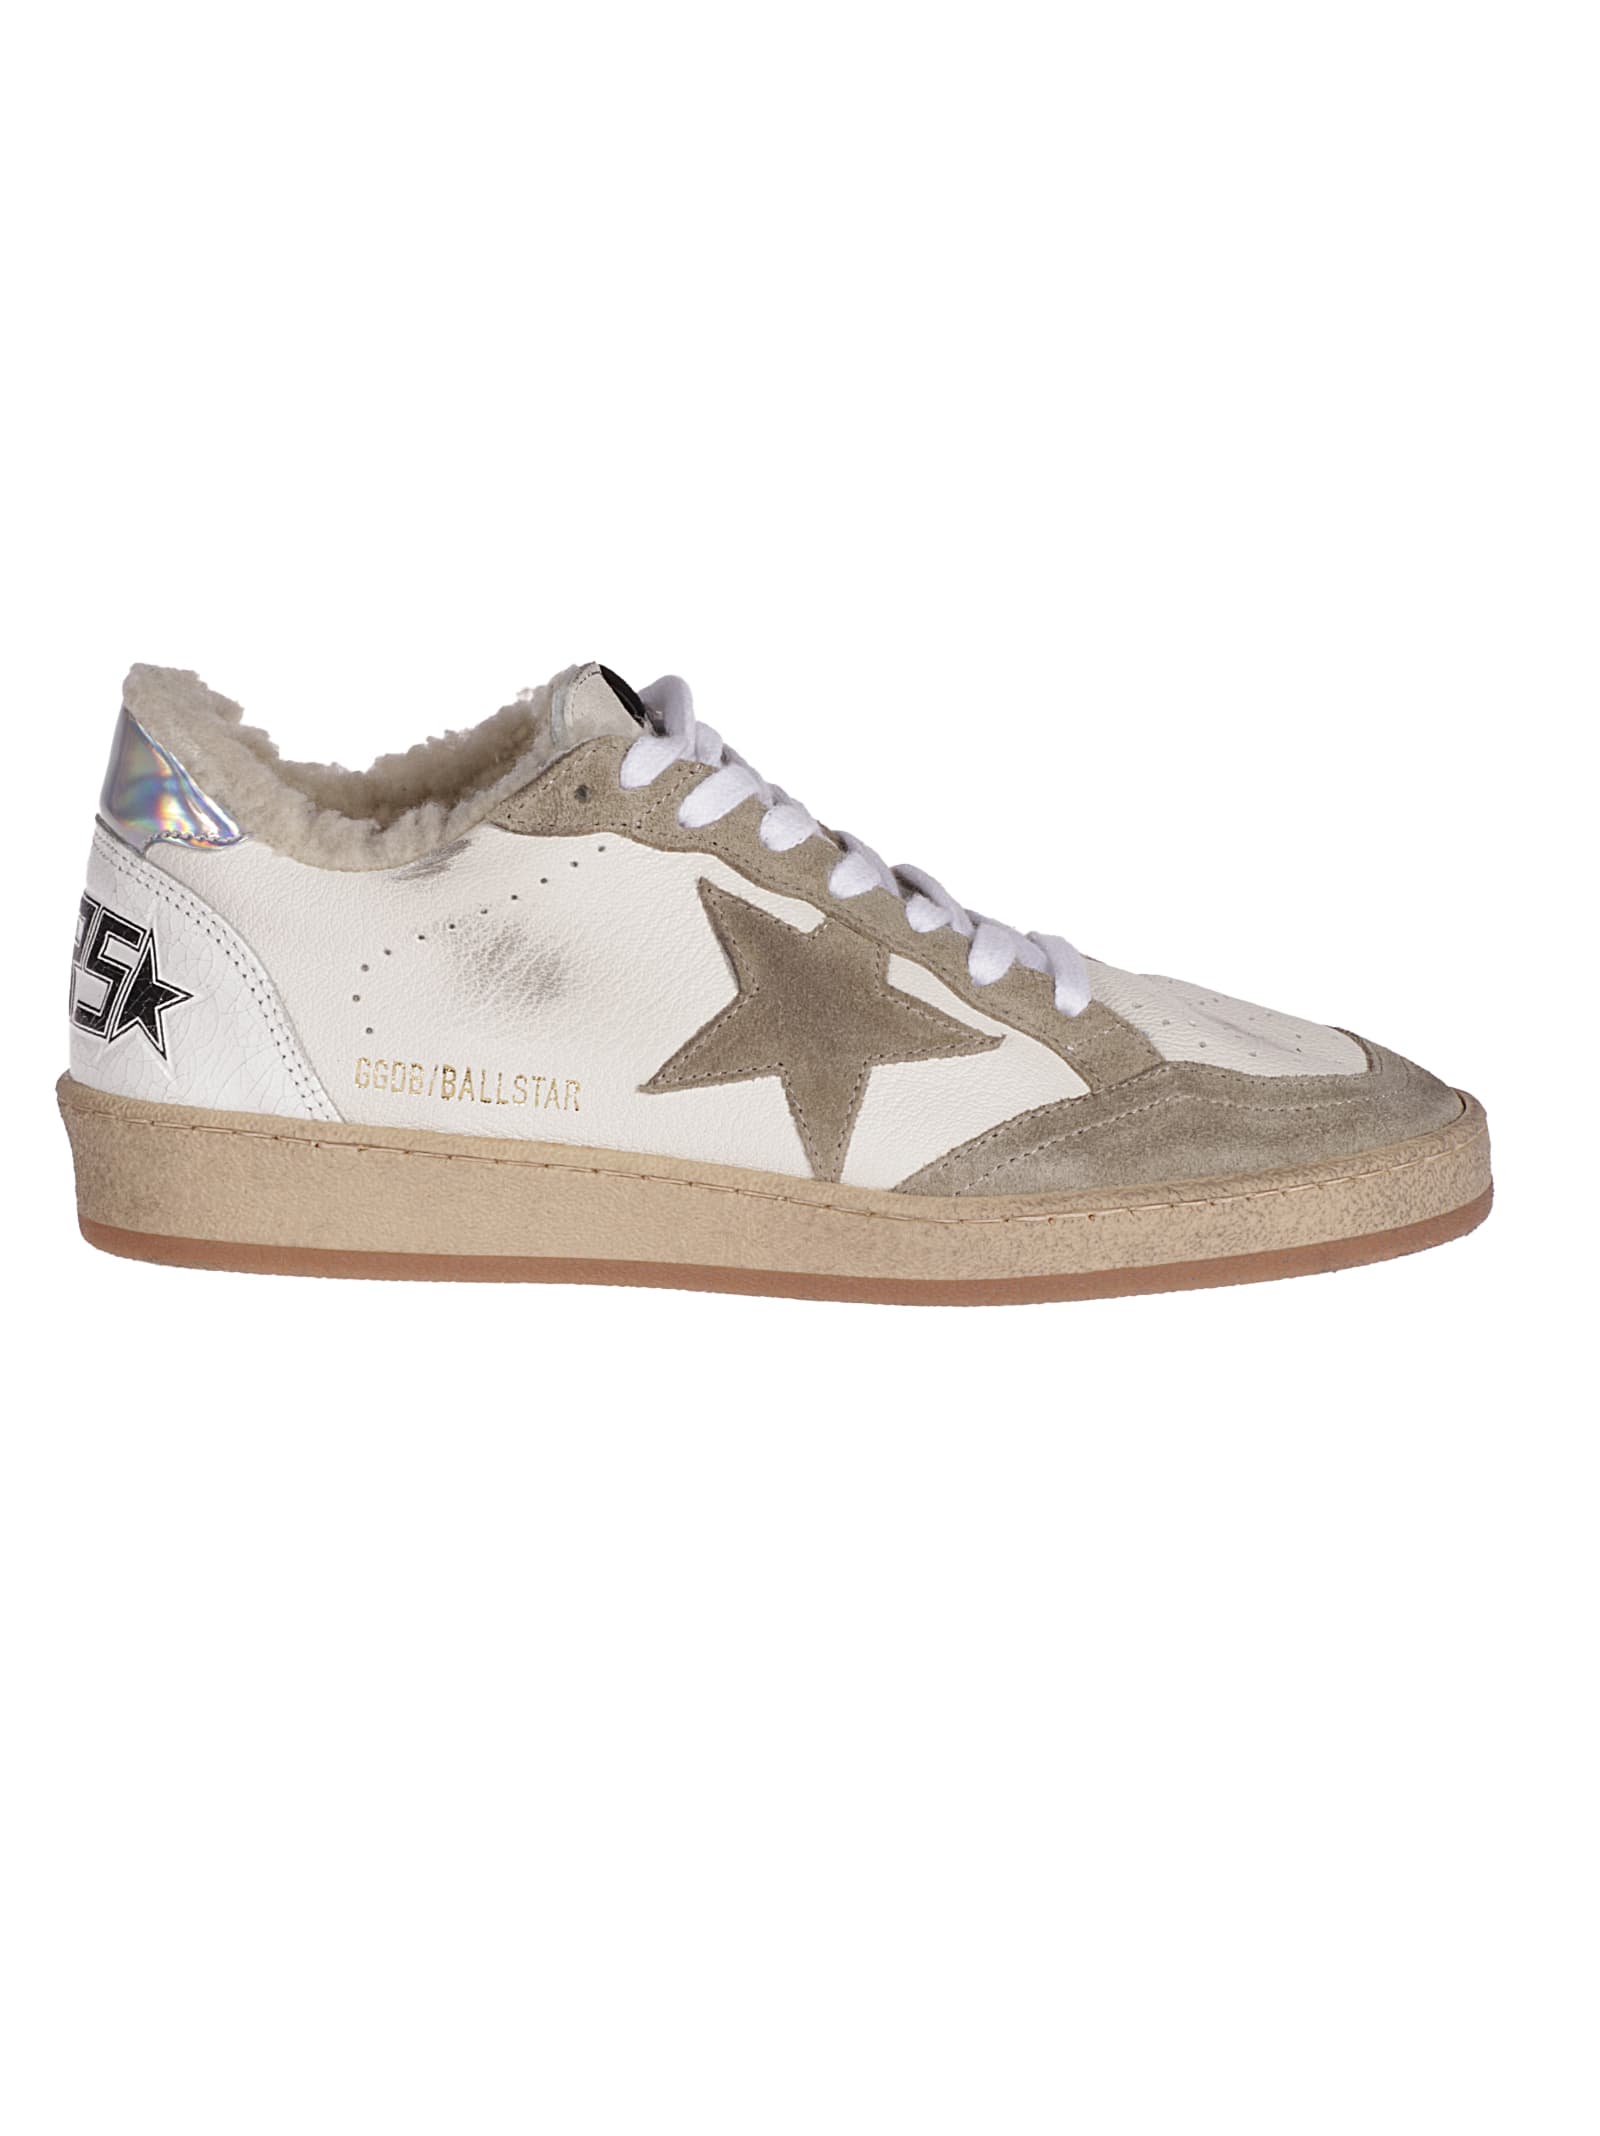 Golden Goose Ball Star Suede Toe And Star Nappa